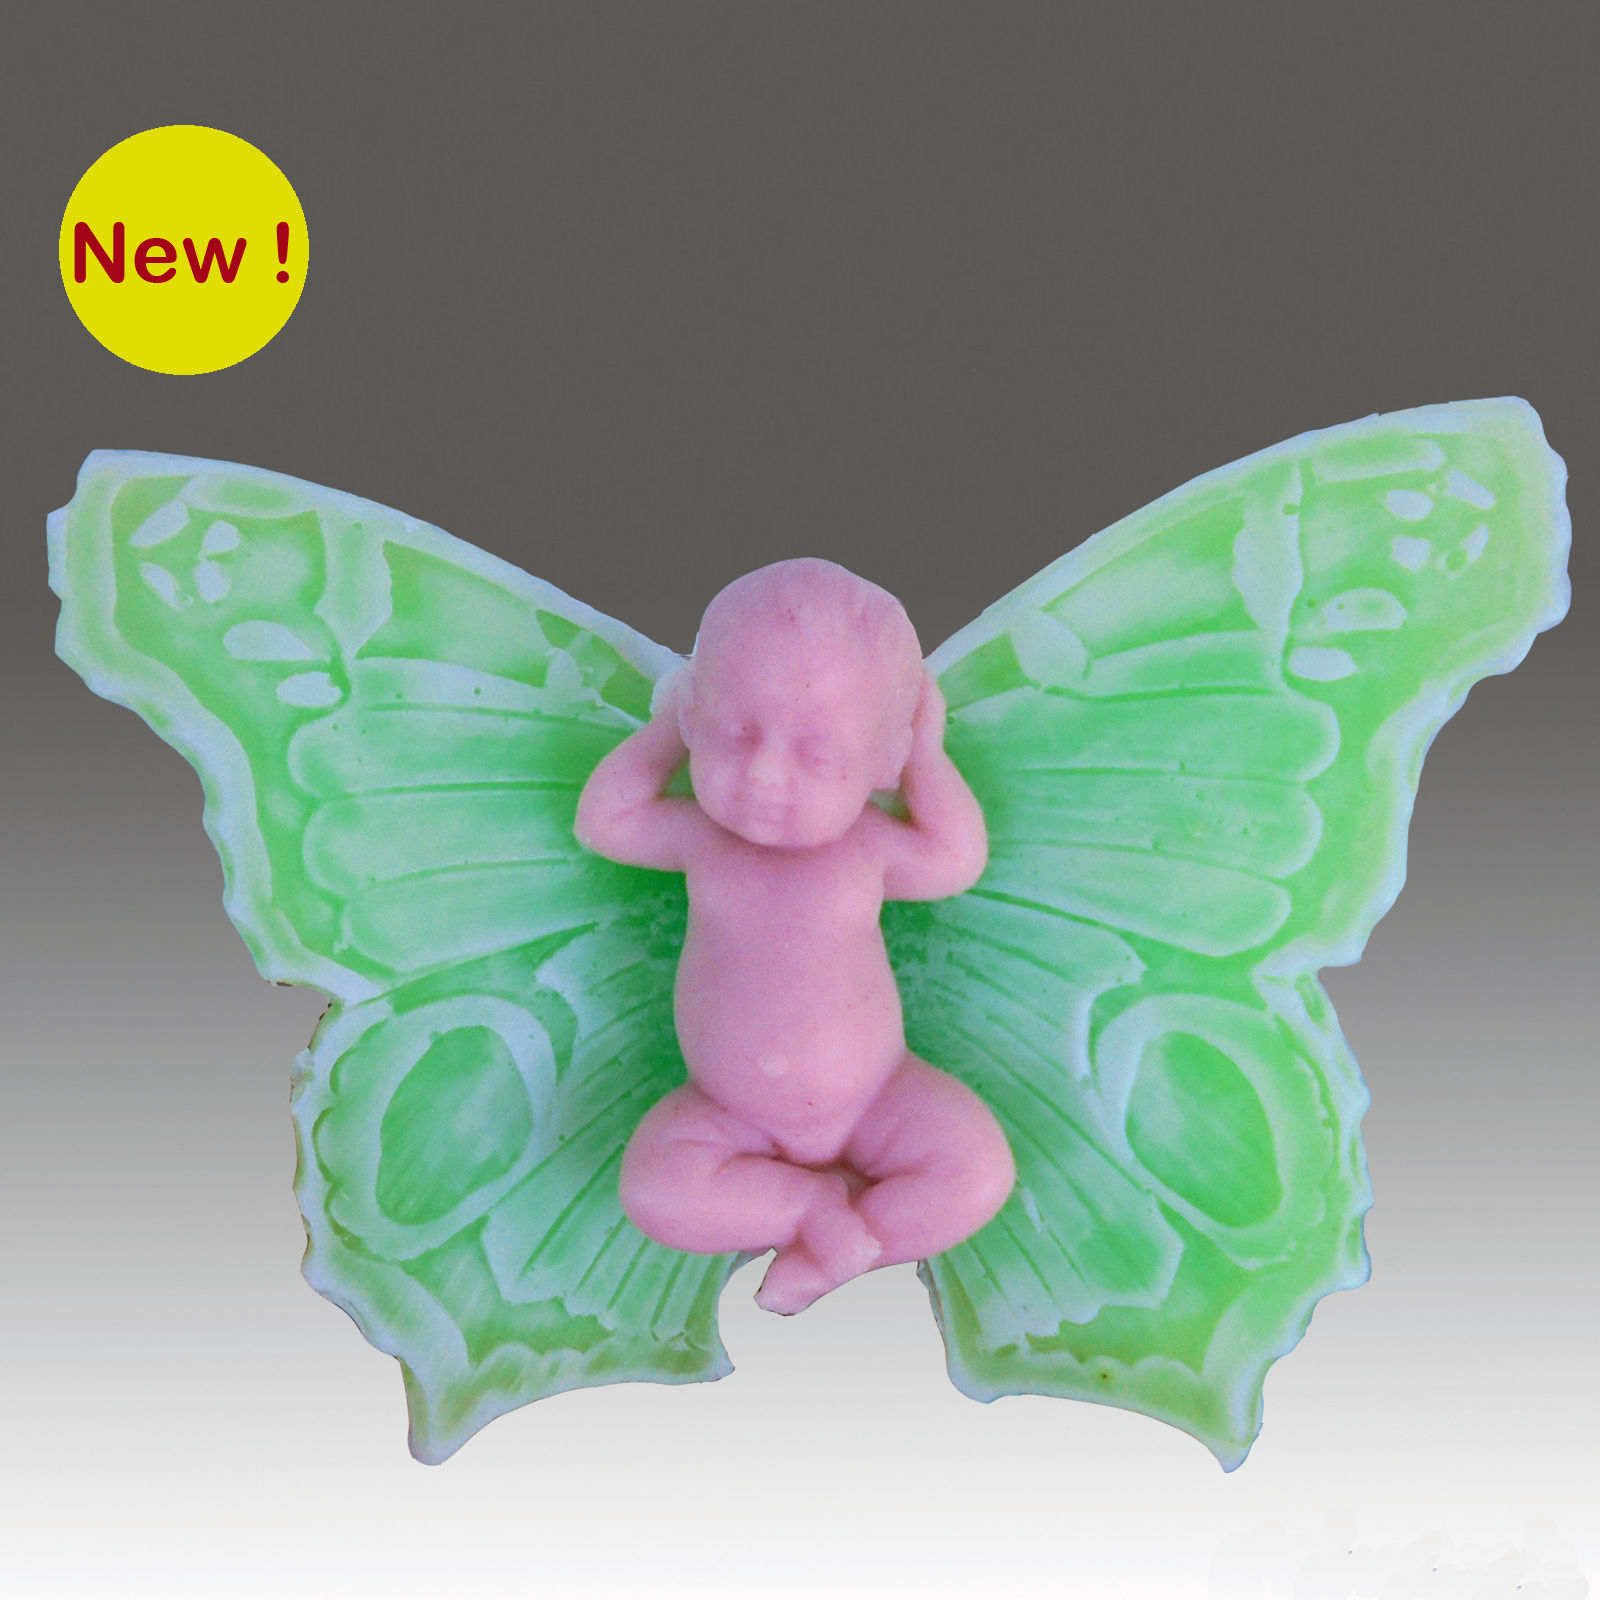 You are buying 2 soaps - 3D Butterfly Baby Fairy handmade Scented soaps